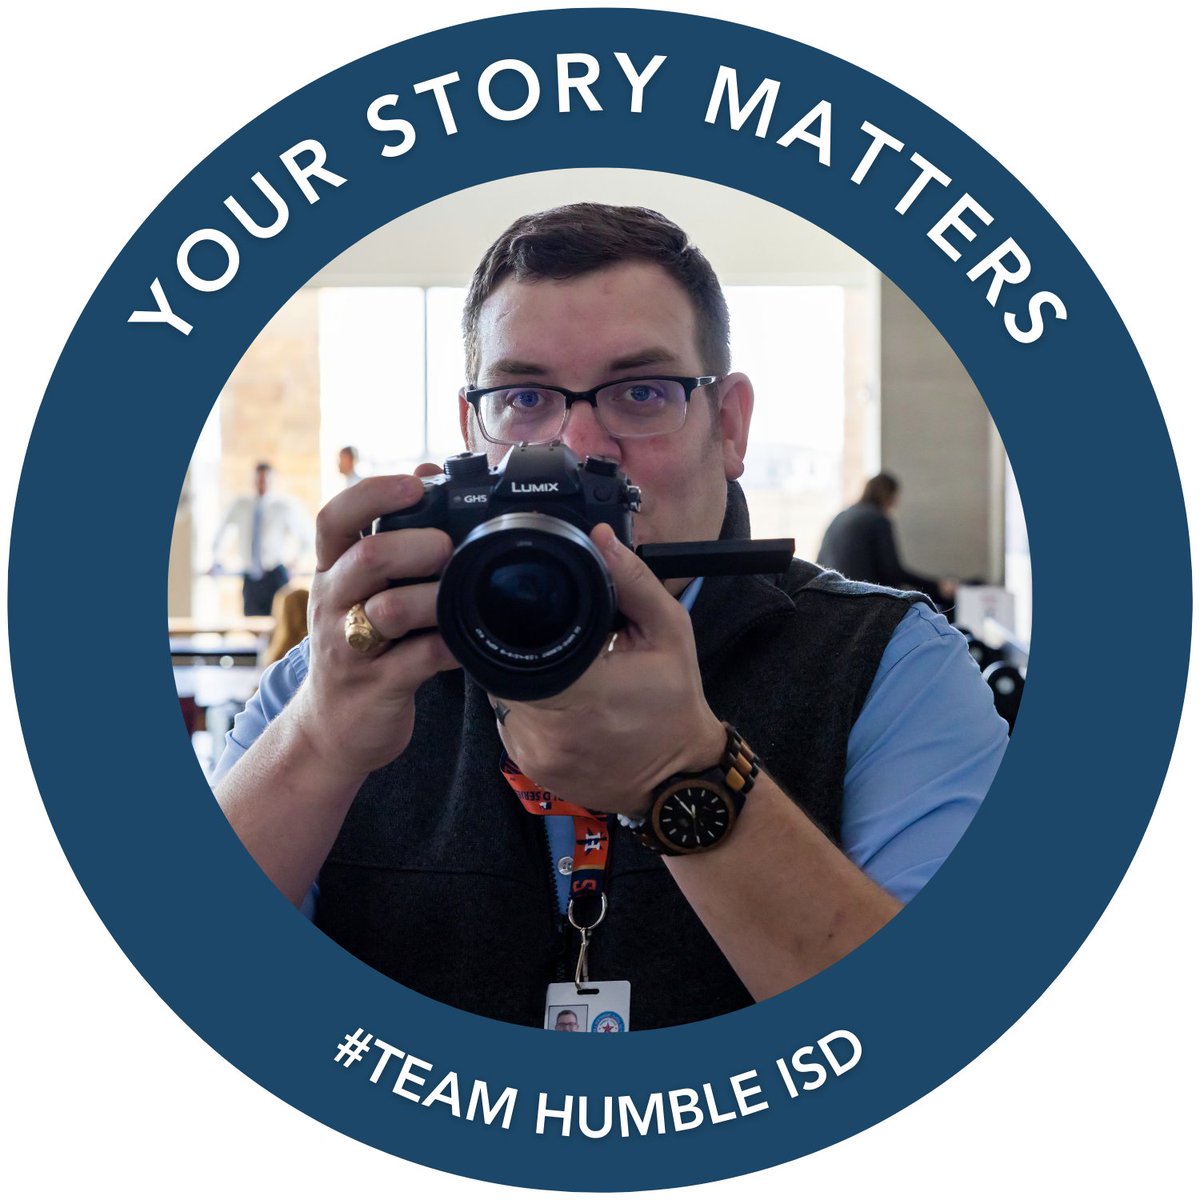 Happy #SchoolCommunicatorsDay!! Proud to get to tell the amazing stories of @HumbleISD every single day and to get to work and learn from an amazing team of #SchoolPR professionals! 

Now ... are my batteries charged and memory cards cleared for the next event?